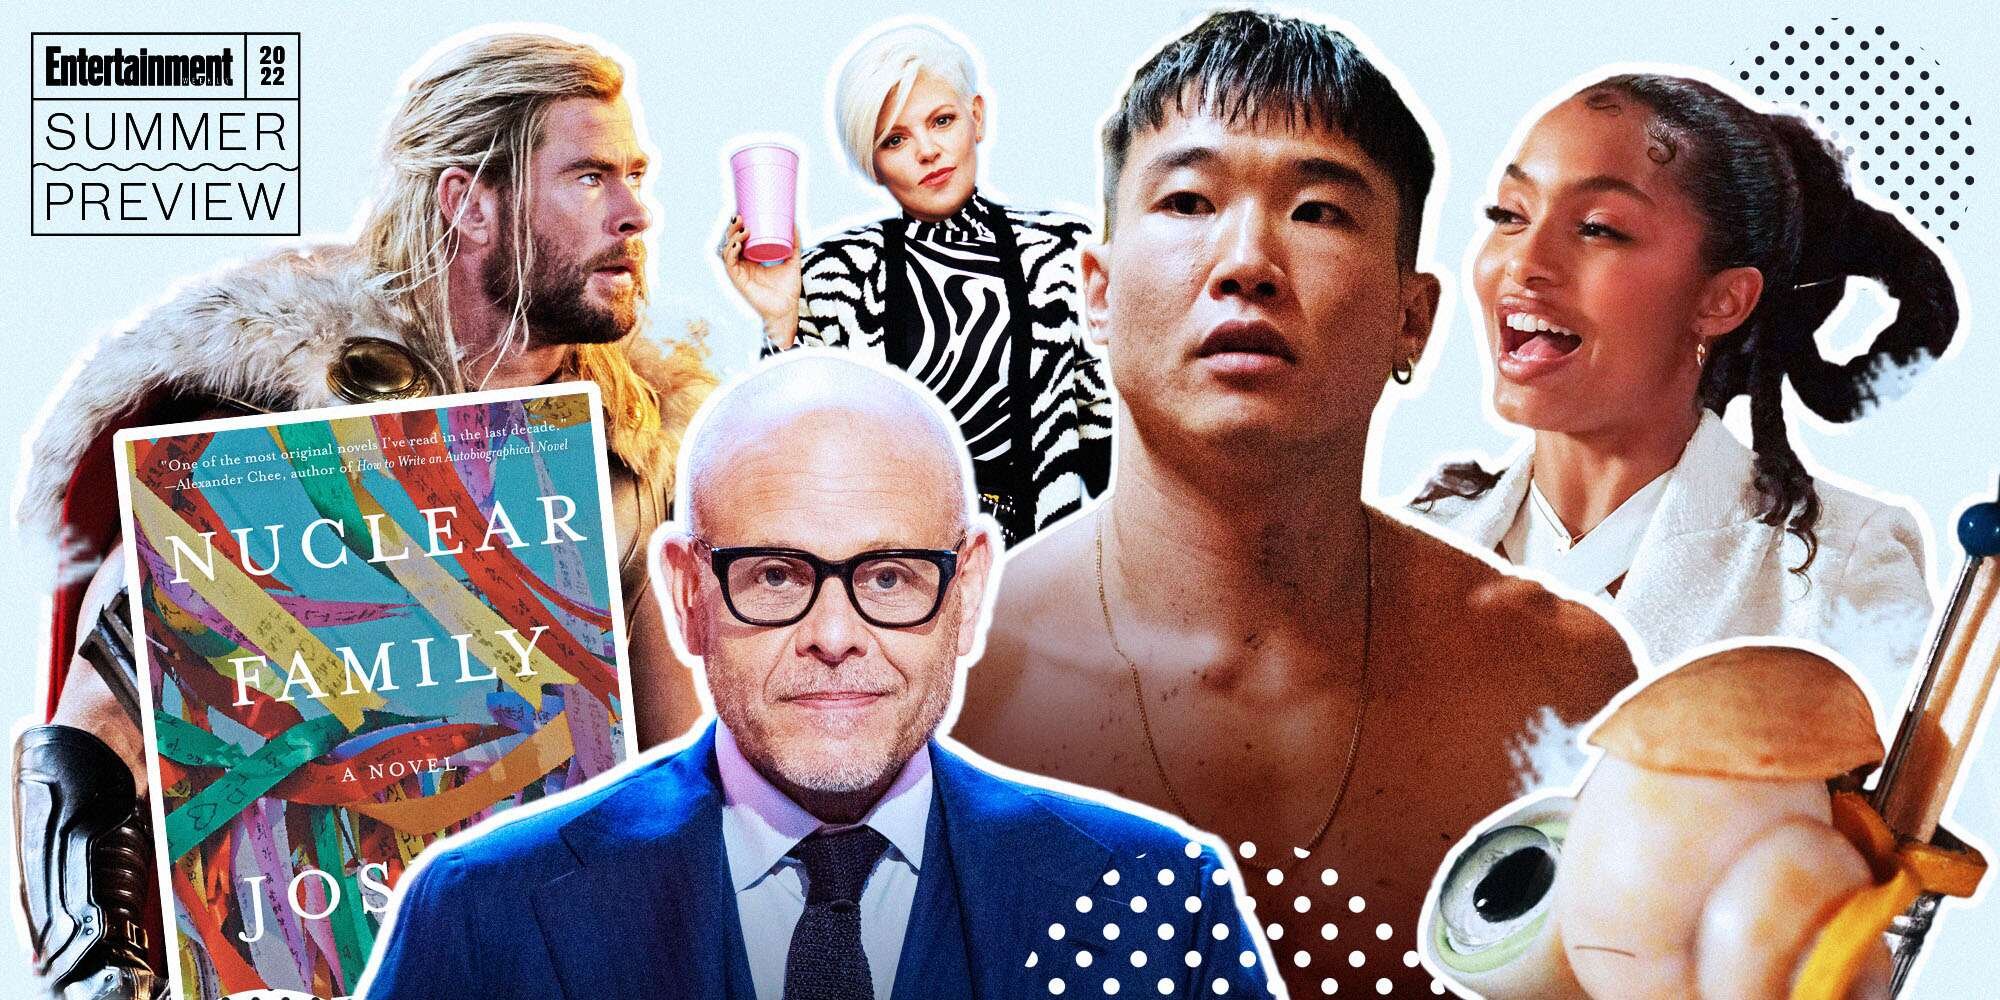 2022 Summer Preview: All the TV shows, movies, books, and music to check out this sunny season